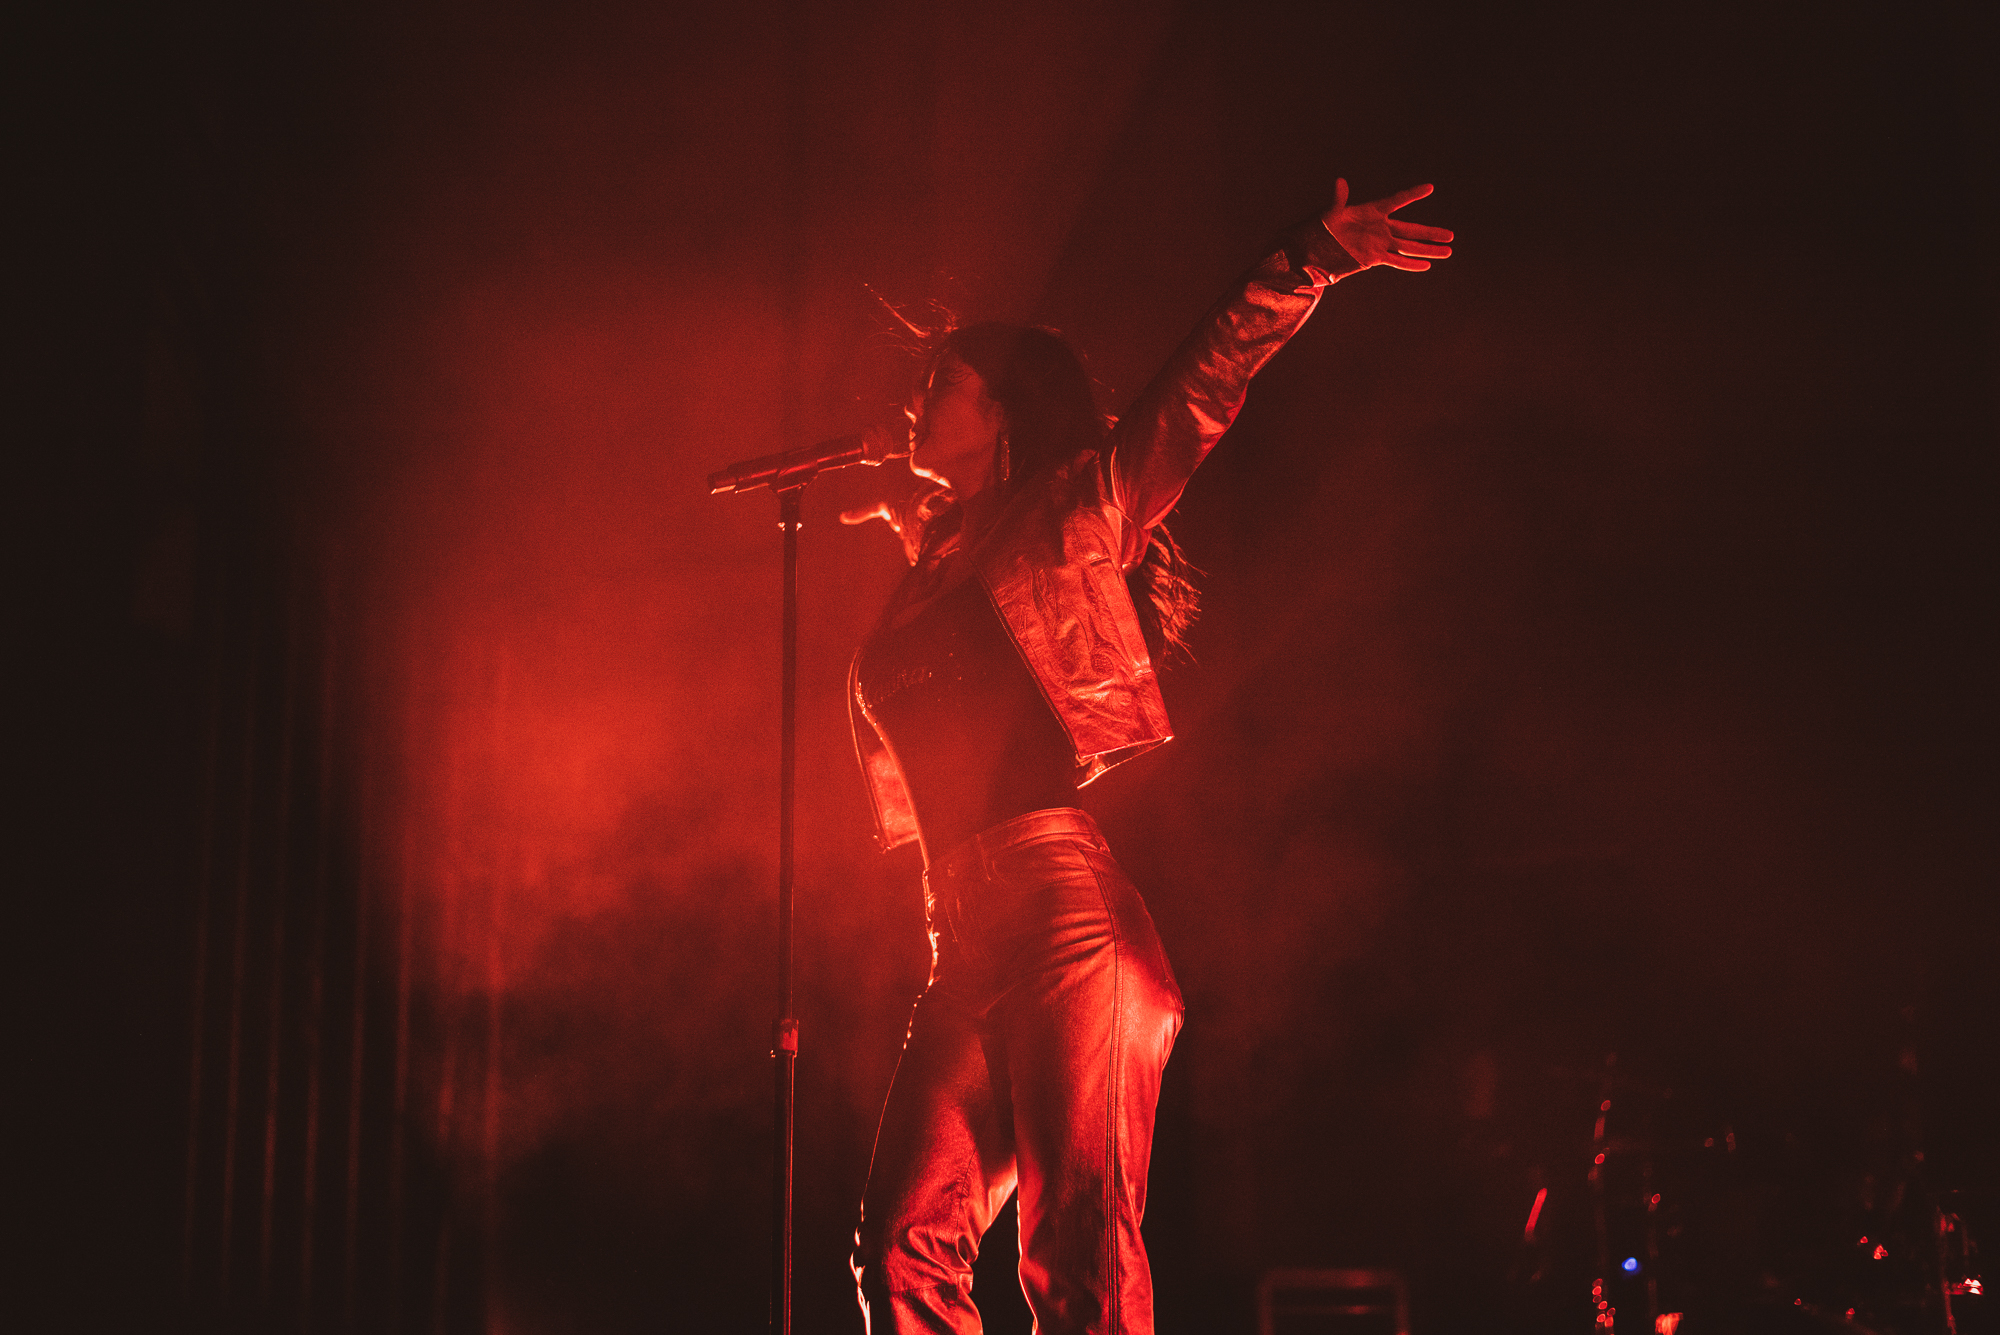 303 Magazine, Music, Concert Review, MARINA, Paramount Theatre, Christian Garcia, Roxanna Carrasco, Ancient Dreams In a Modern Land, Marina and the Diamonds, Electra Heart, Froot